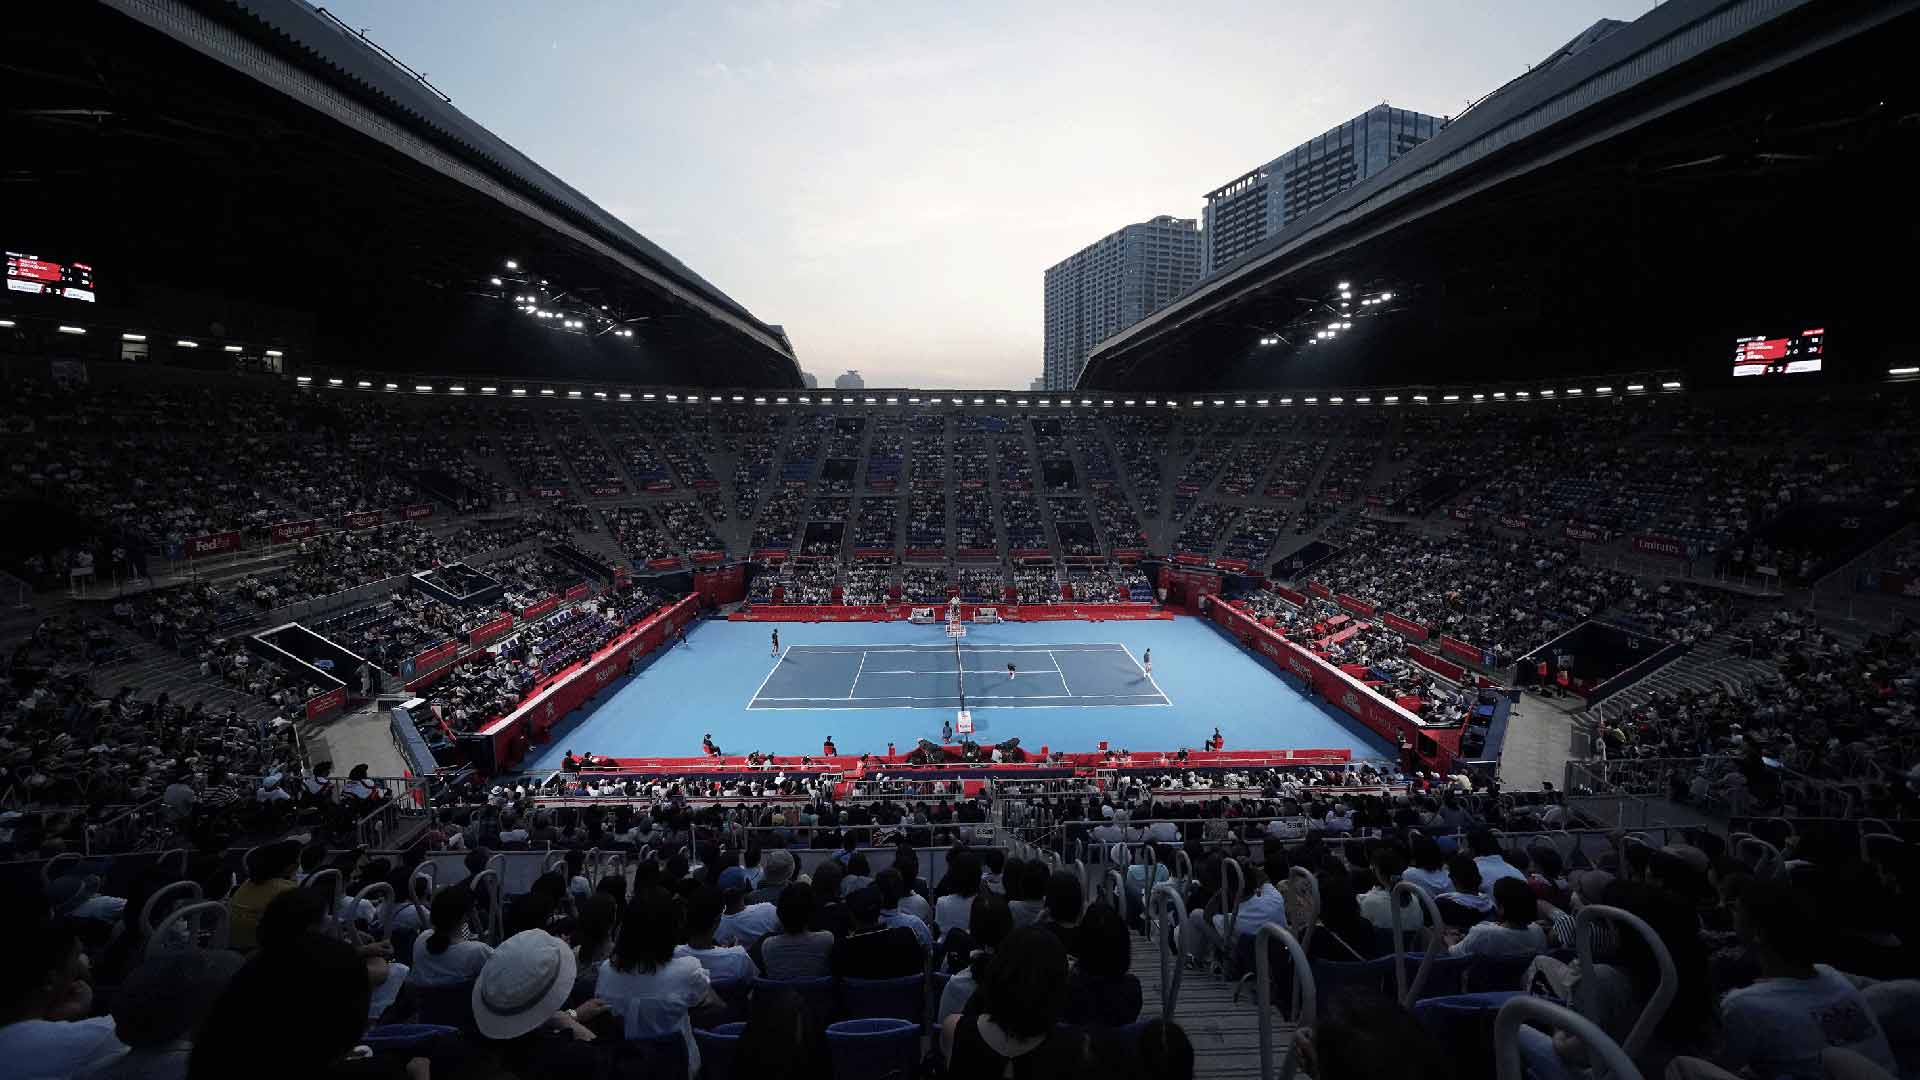 15-facts-about-japan-open-tennis